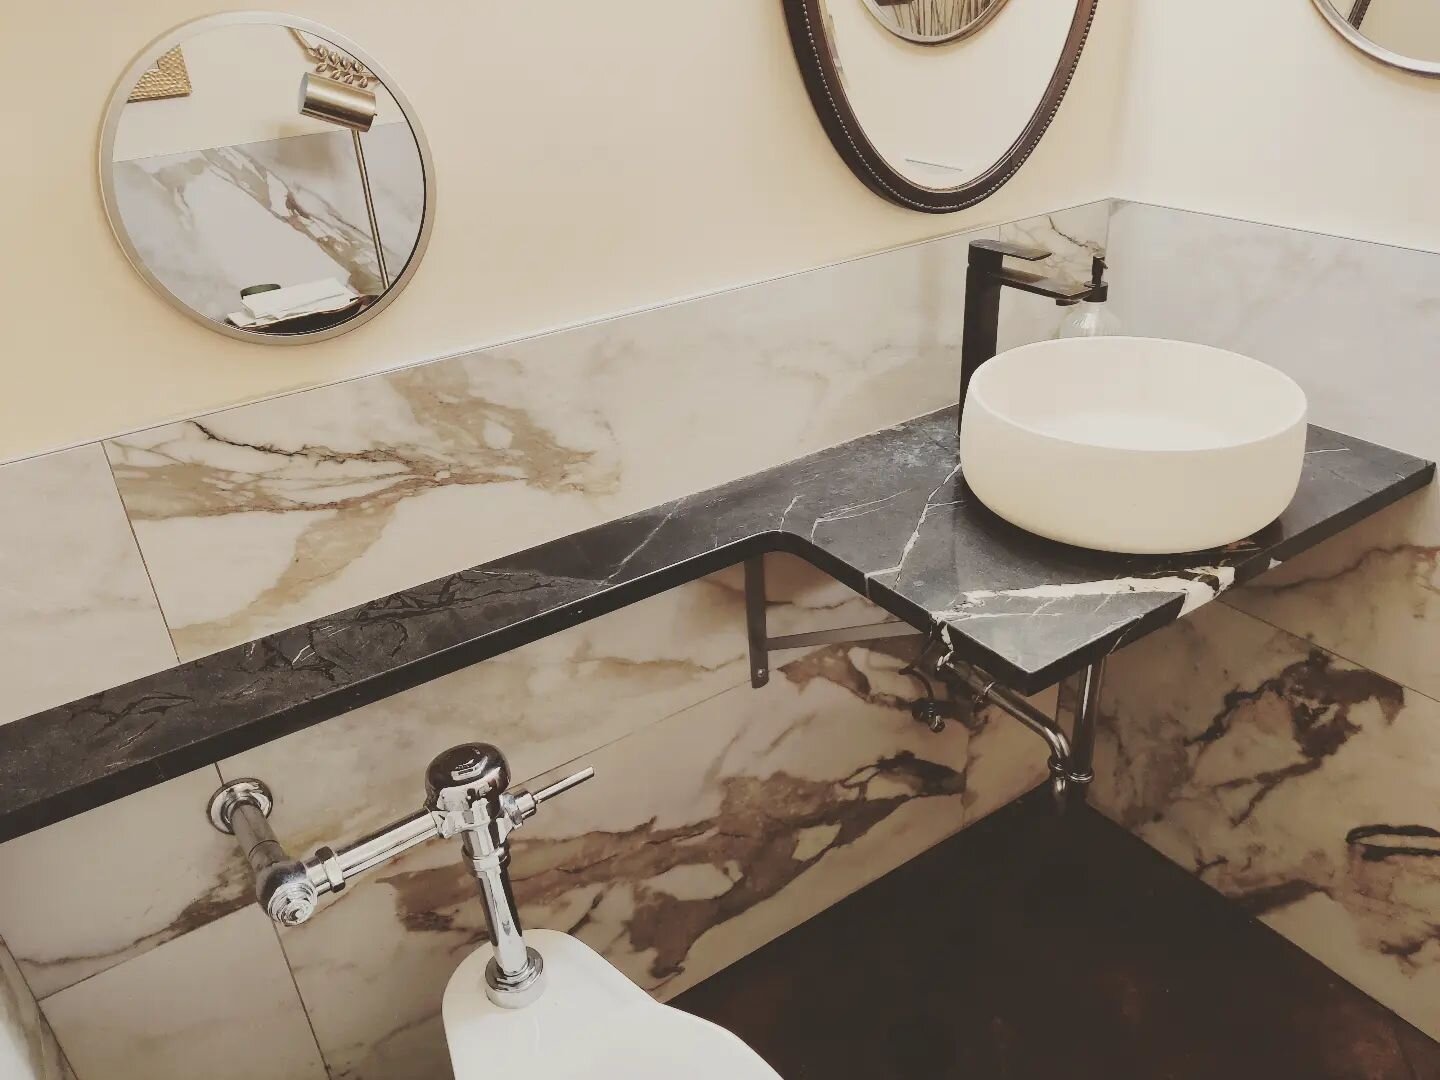 @bigatulsa has gotten an upgrade! Their bathroom countertops were made with remnant material called black diamond #naturalstone . The entrance was redone as well and is inviting and ready to serve. Thank you #midtowntulsa